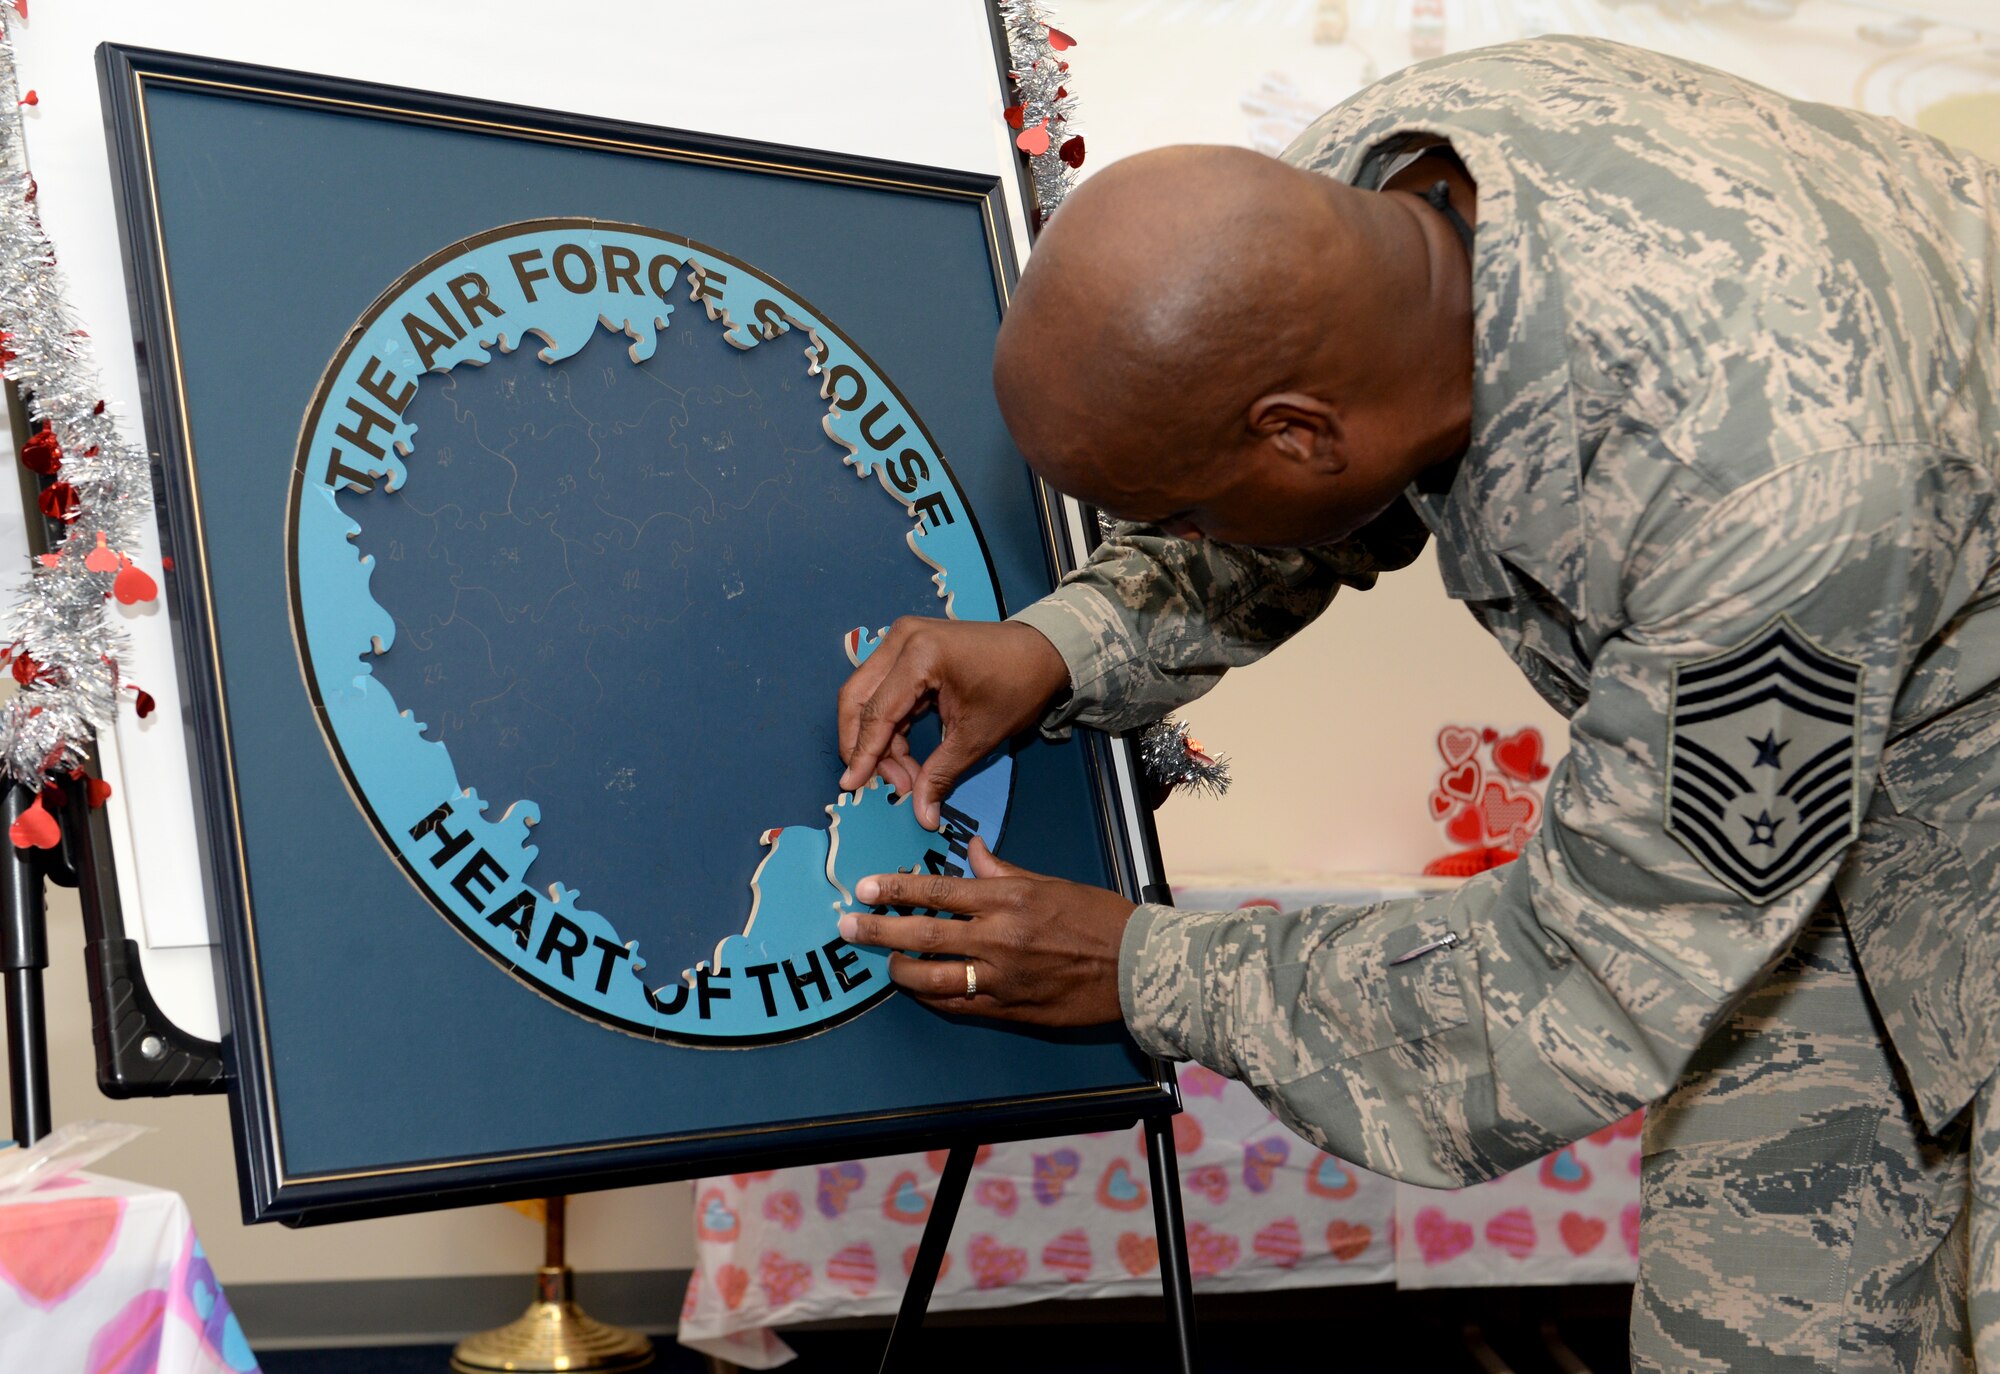 Chief Master Sgt. Michael McMillan, 36th Wing command chief master sergeant, attaches a puzzle piece during the Heart Link Spouses Workshop Jan. 26, 2015, at Andersen Air Force Base, Guam. The puzzle forms the Heart Link logo; wings to represent the Air Force, an airplane to represent the Air Force mission, and a red contrail to represent the “link” of spouses as the heart of the Air Force team. (U.S. Air Force photo by Senior Airman Amanda Morris/Released)